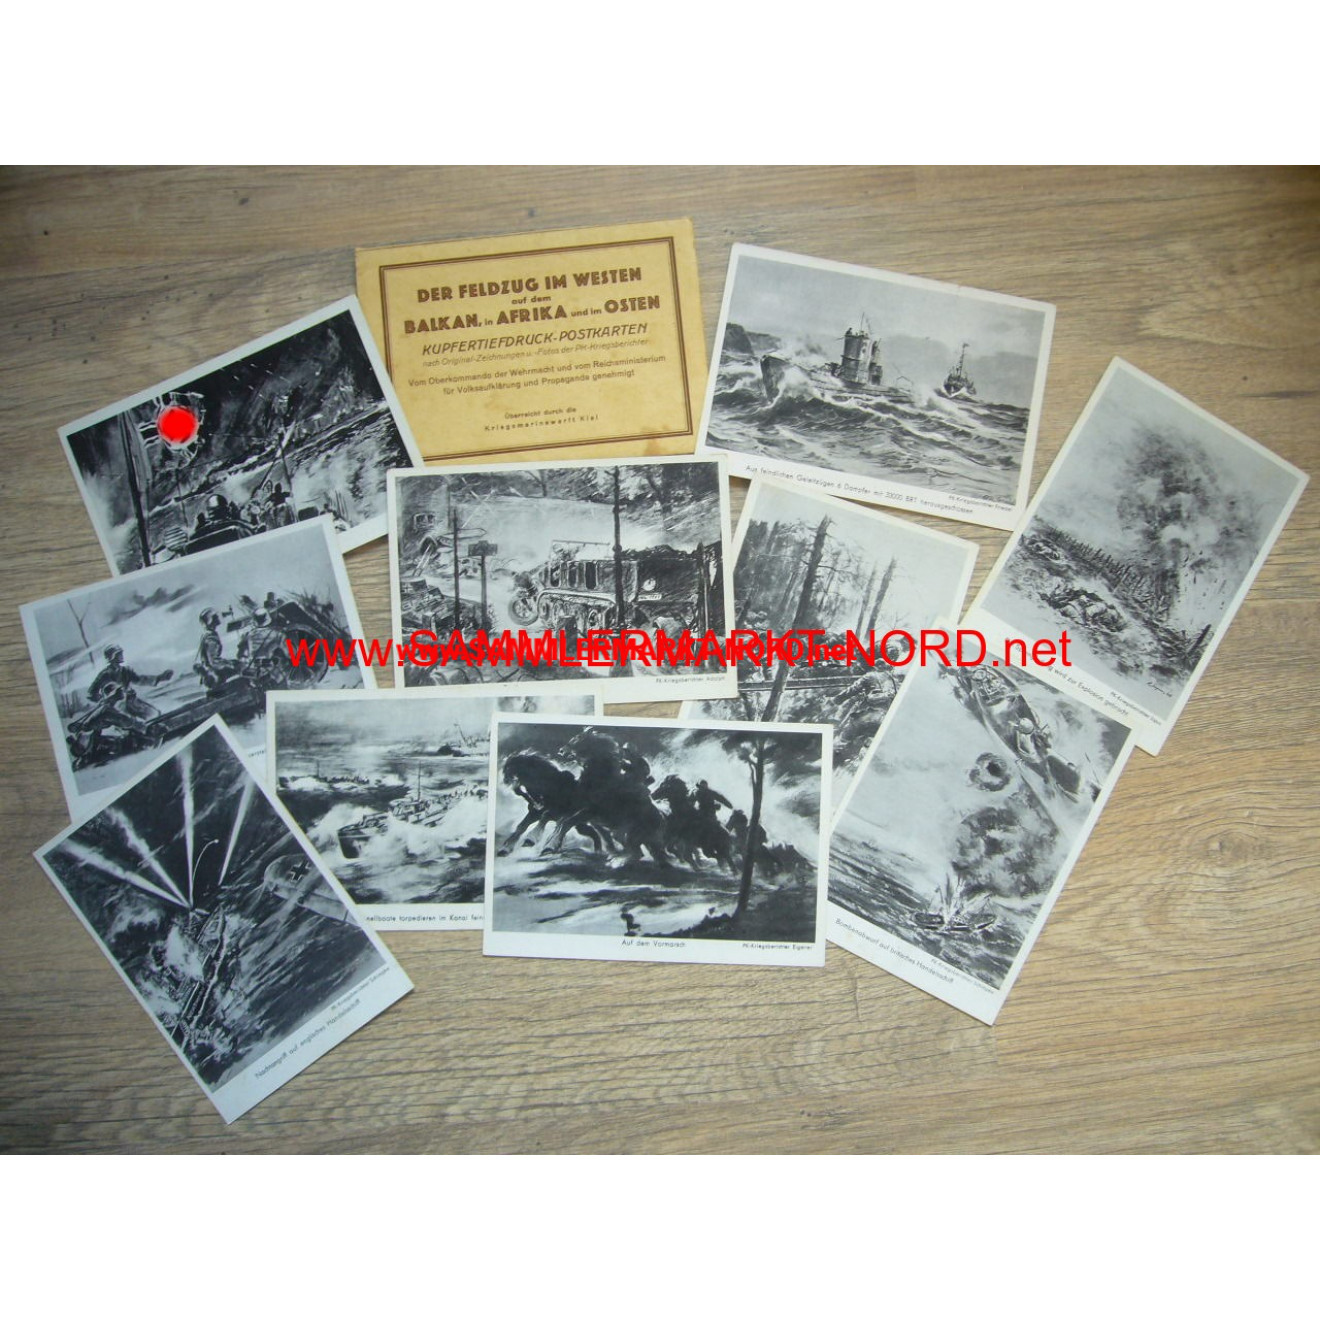 The campaign in the west - postcard folder